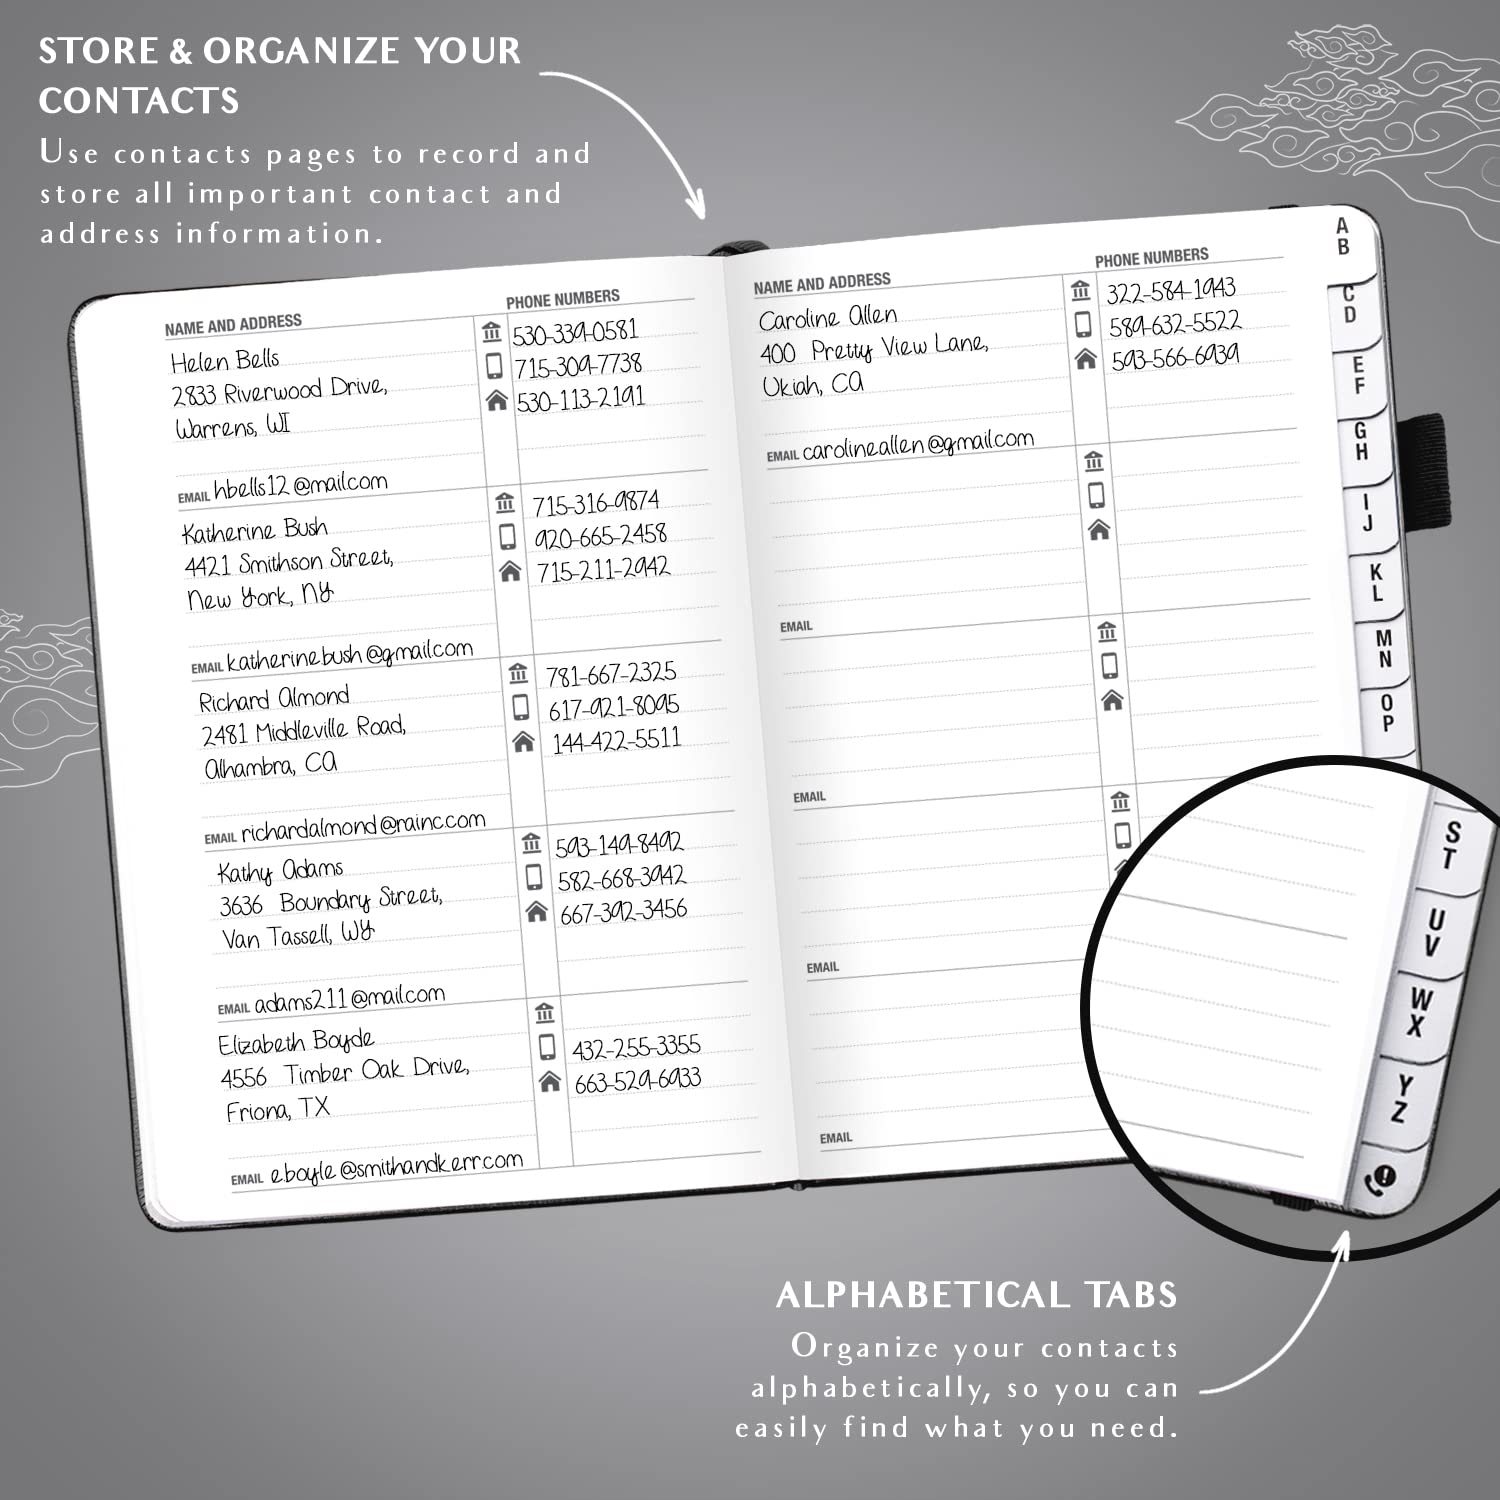 Legend Planner Address Book with Alphabetical Tabs –Telephone Contacts Book for Phone Numbers, Addresses, Passwords, Medium (Black)